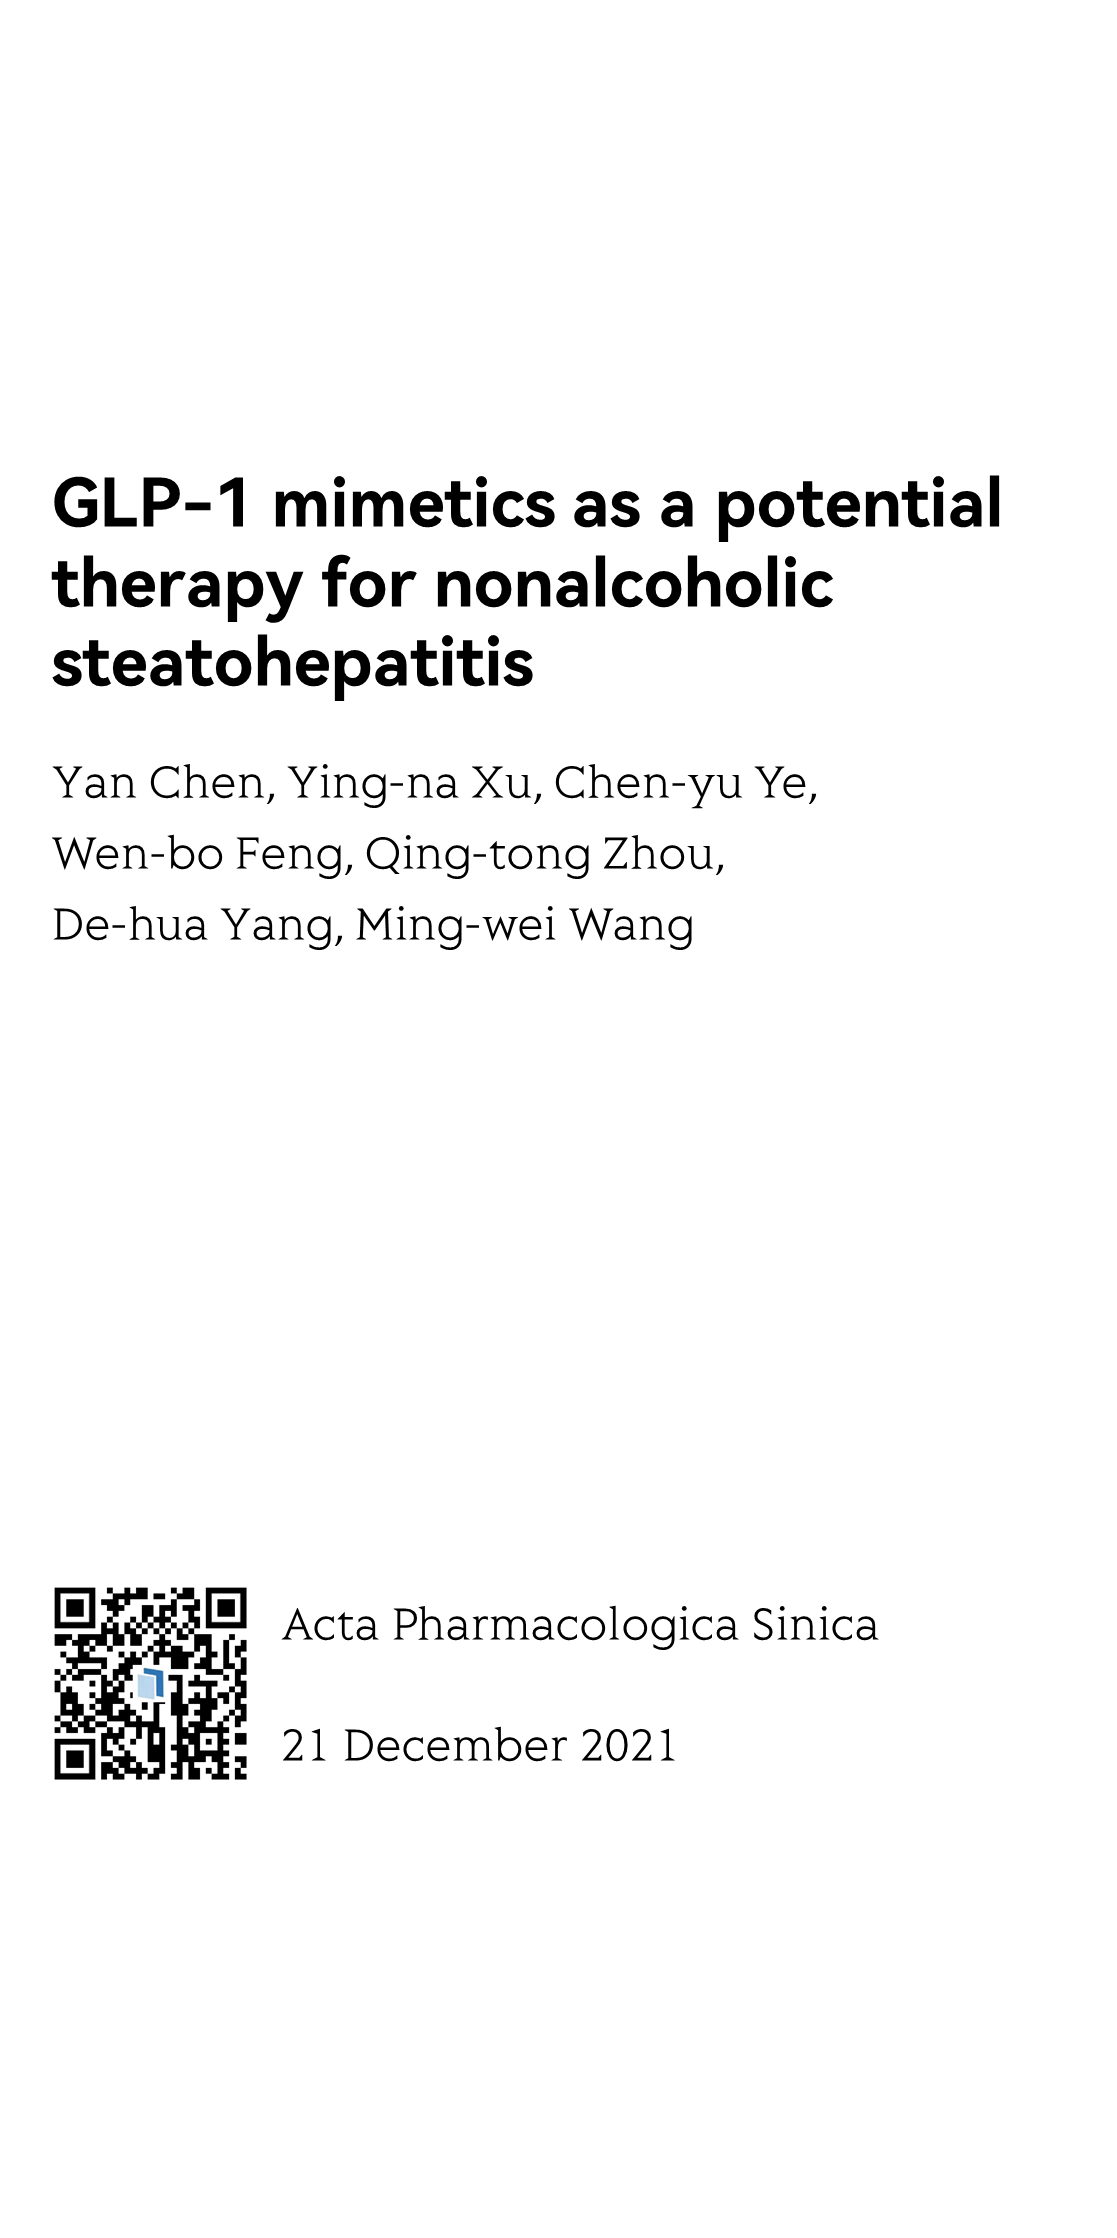 GLP-1 mimetics as a potential therapy for nonalcoholic steatohepatitis_1